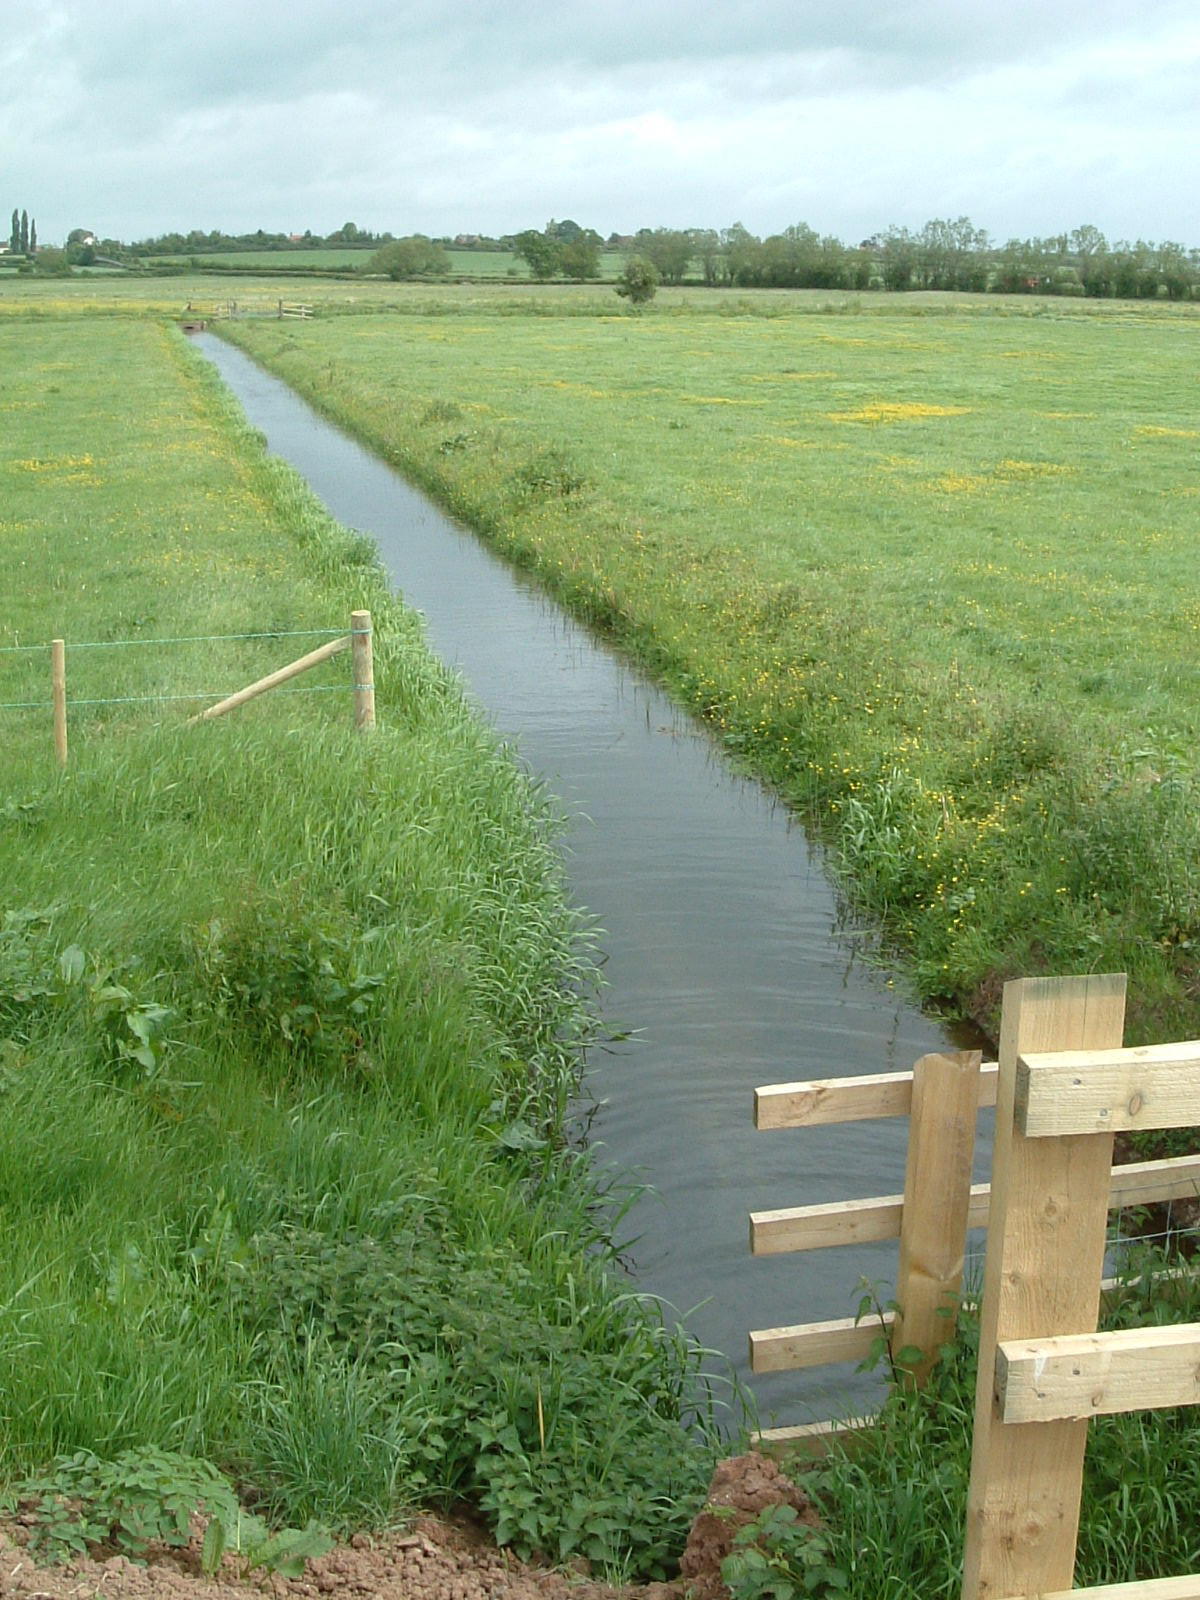 An irrigation channel in the wetlands by the River Tone